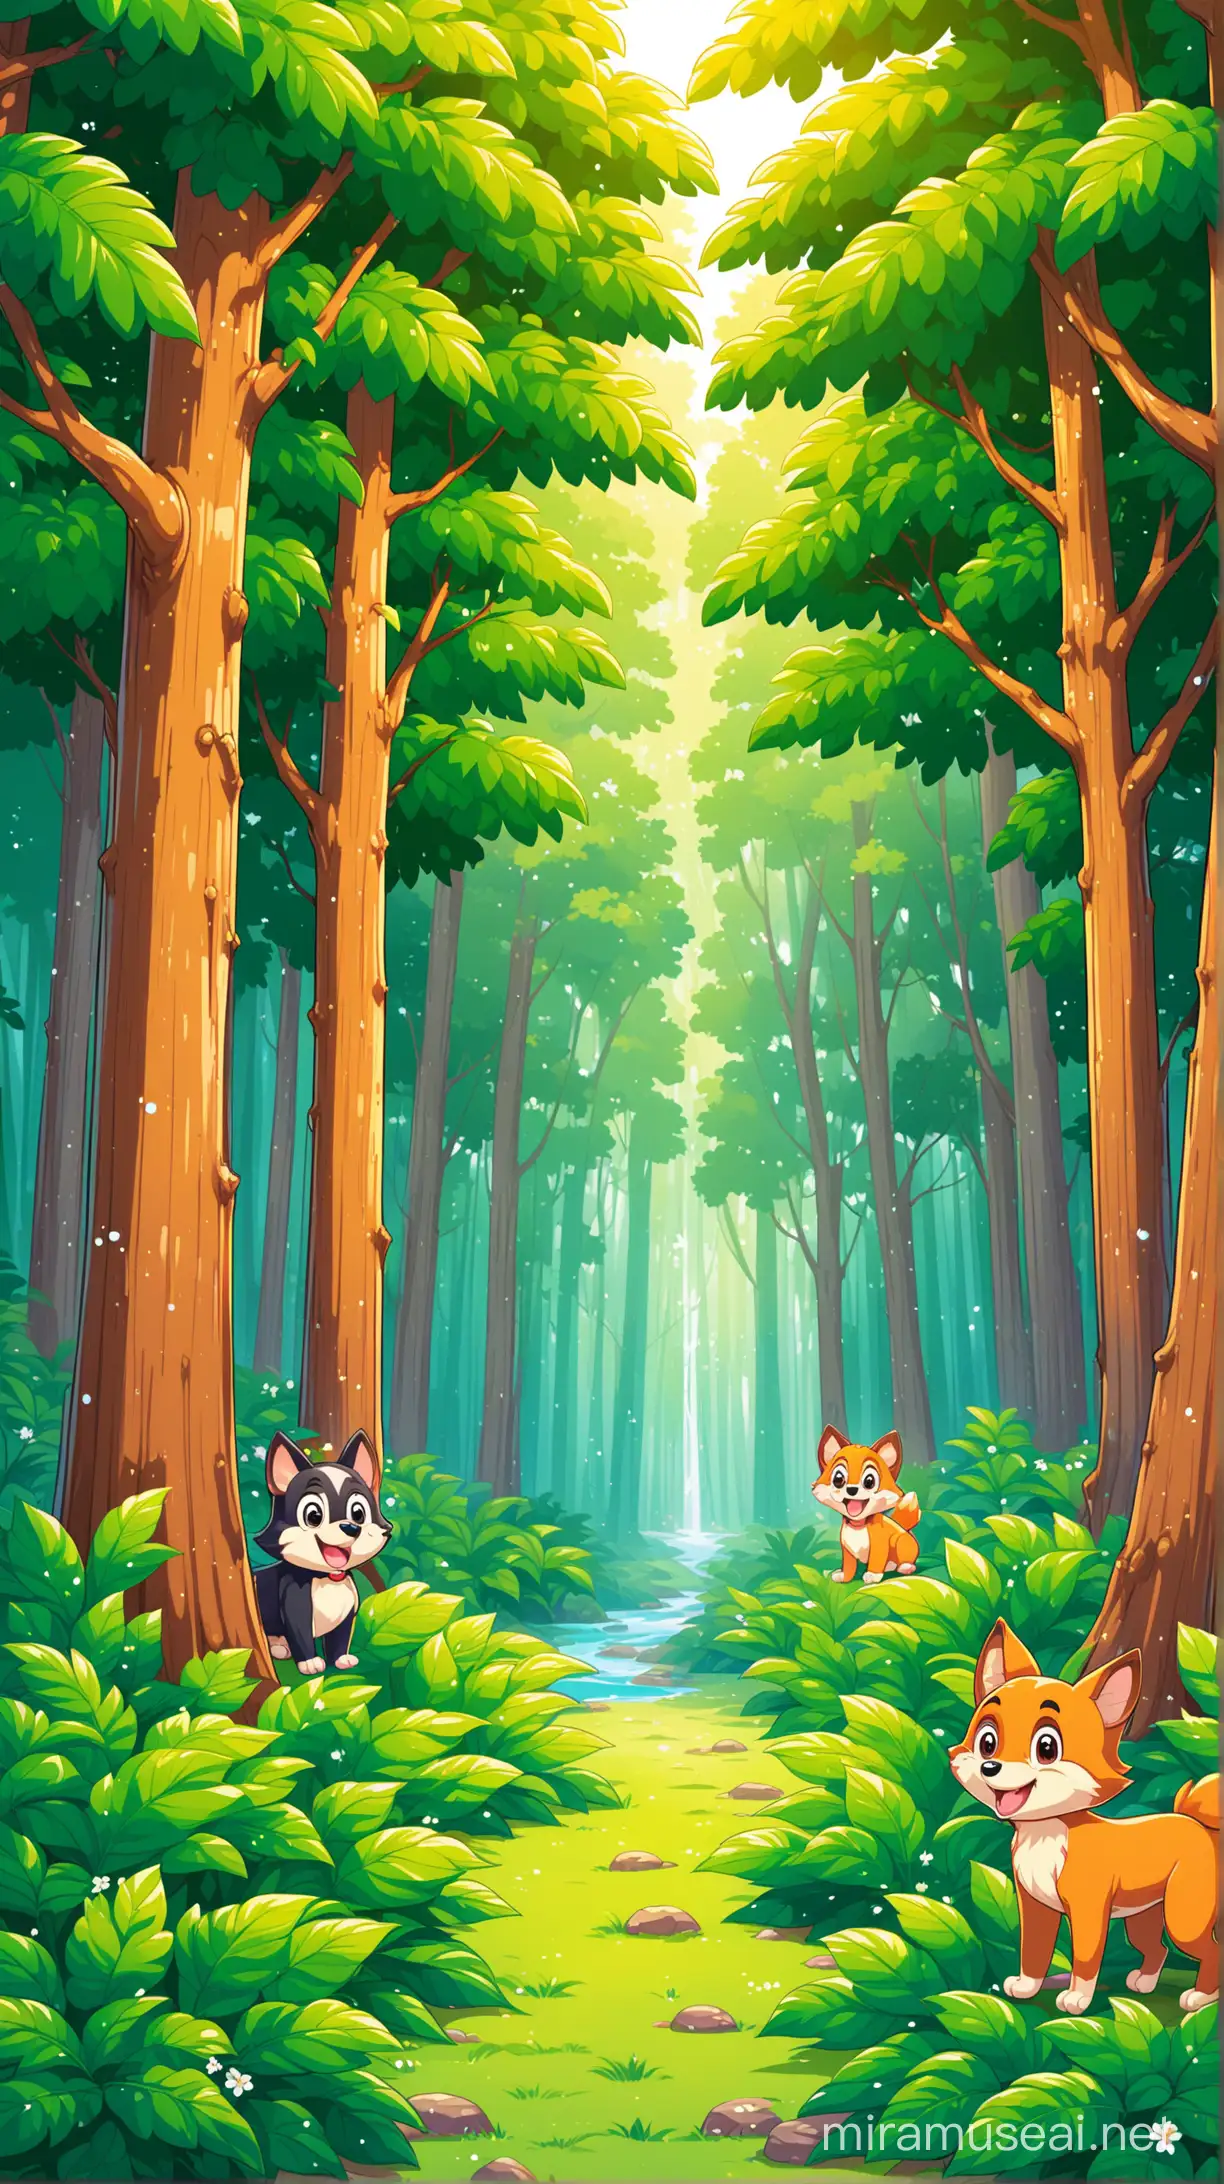 Cartoon in Forest Clearing Whimsical Scene of Adventure and Discovery